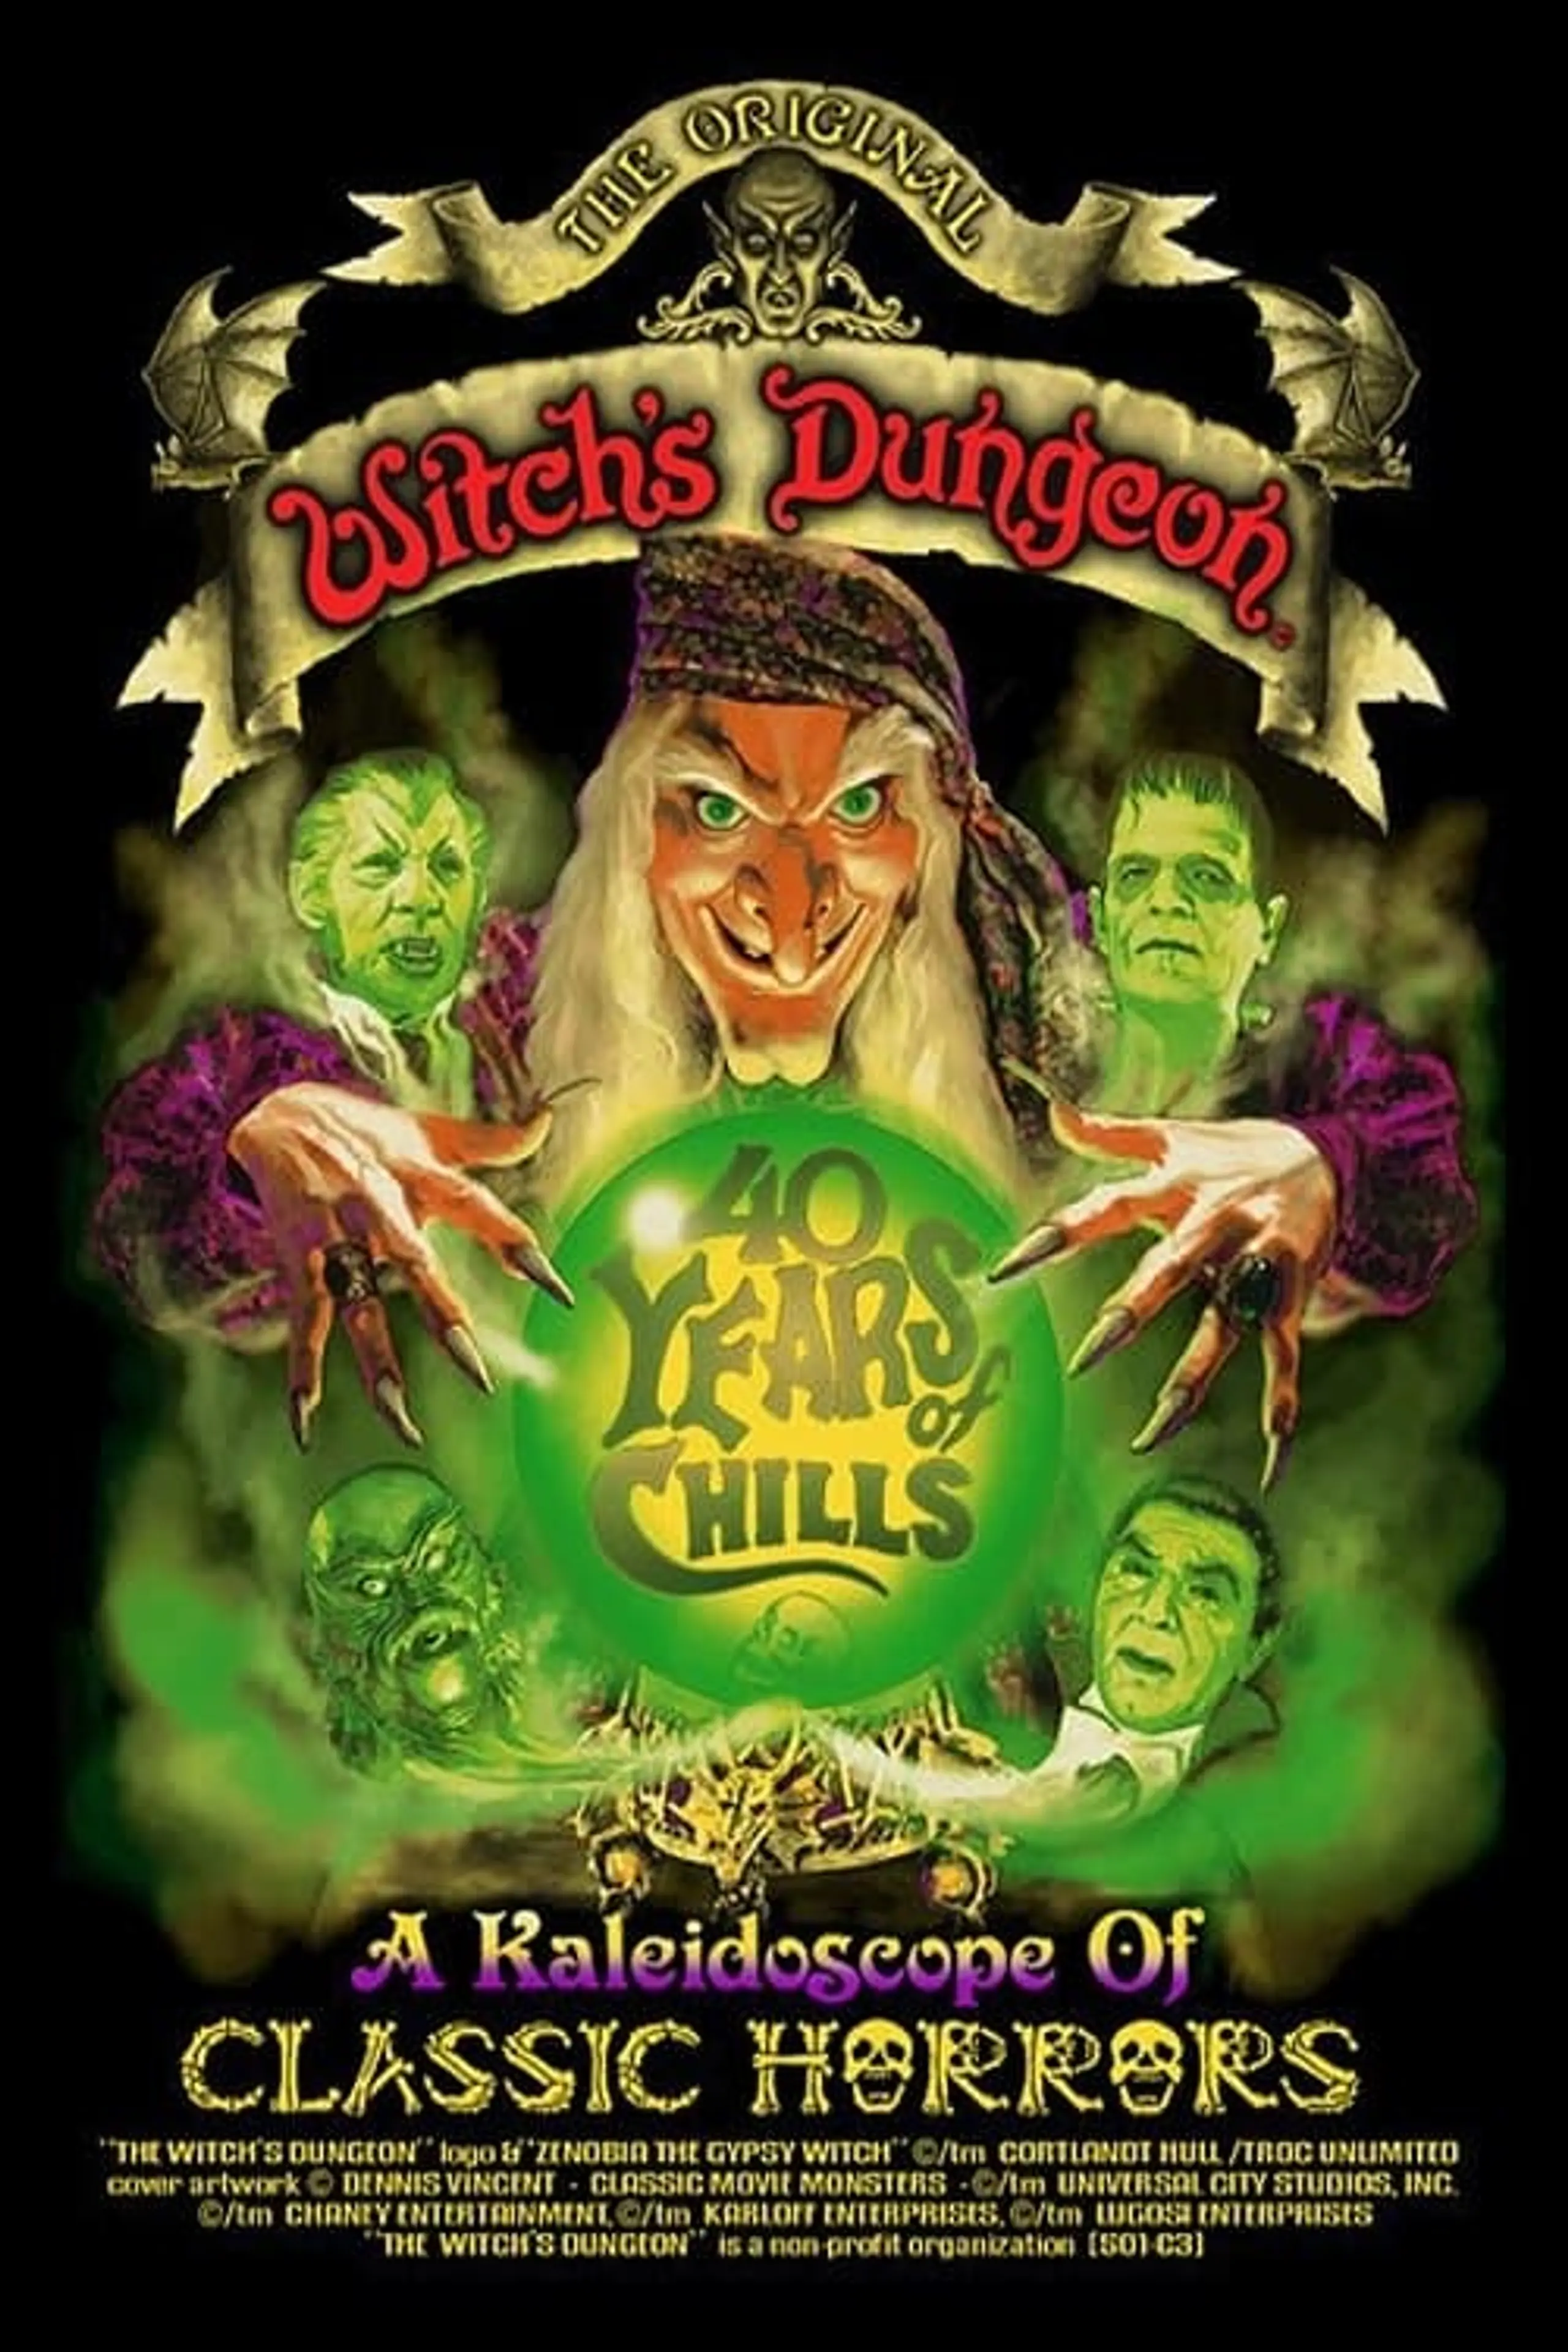 Witch's Dungeon: 40 Years of Chills